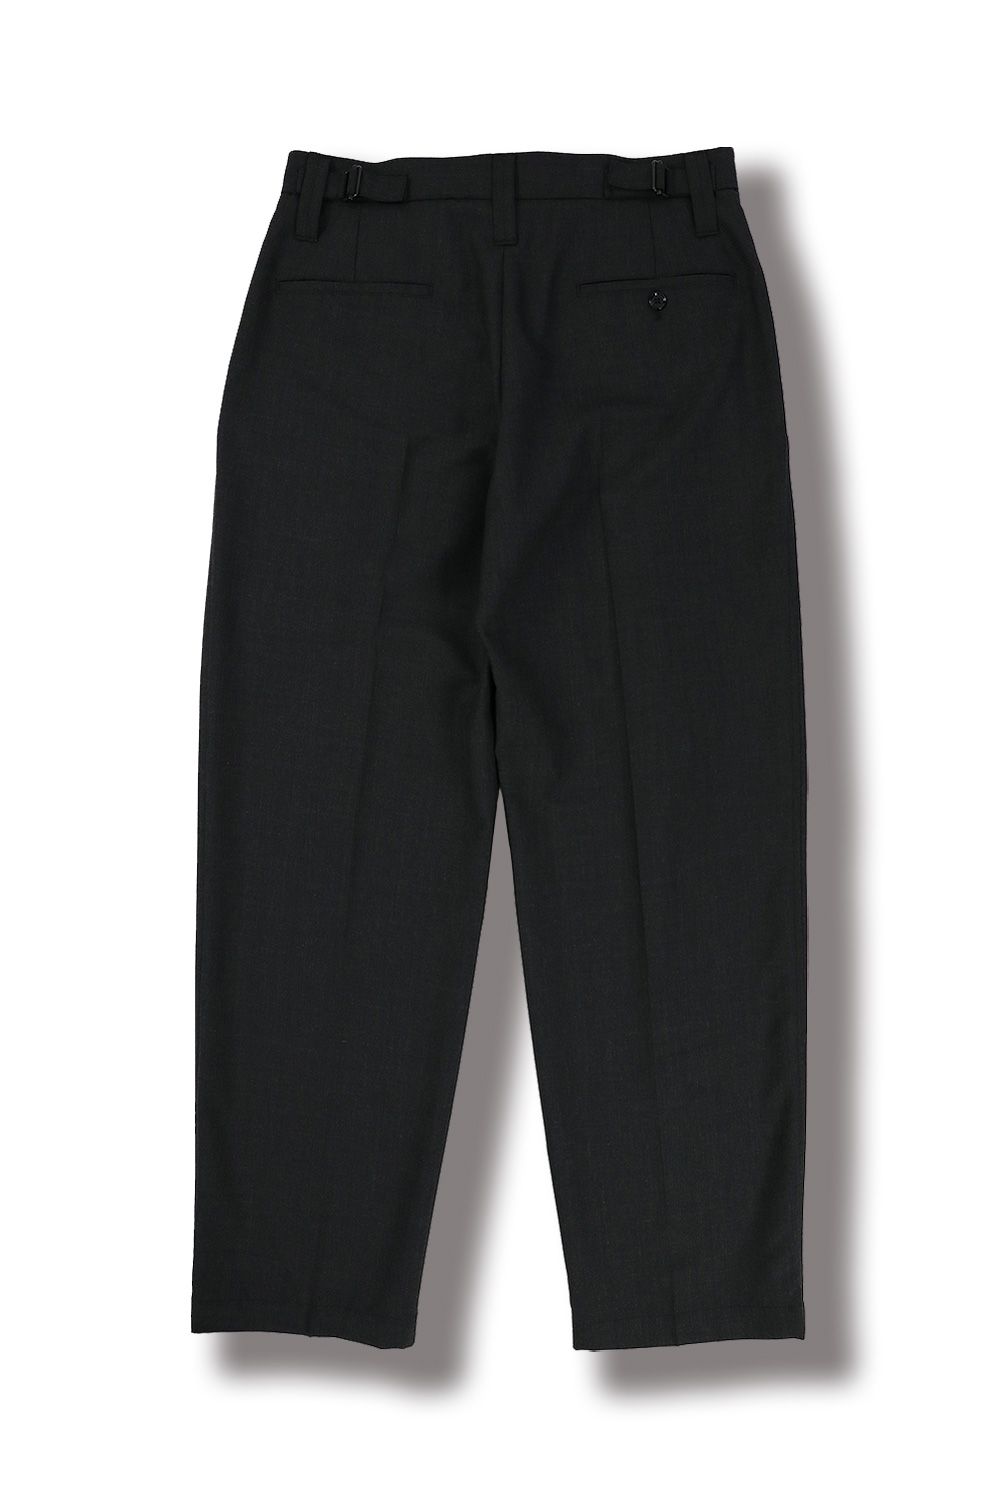 LEMAIRE 【23AW】ONE PLEAT PANTS(CAVIAR) Acacia ONLINESTORE